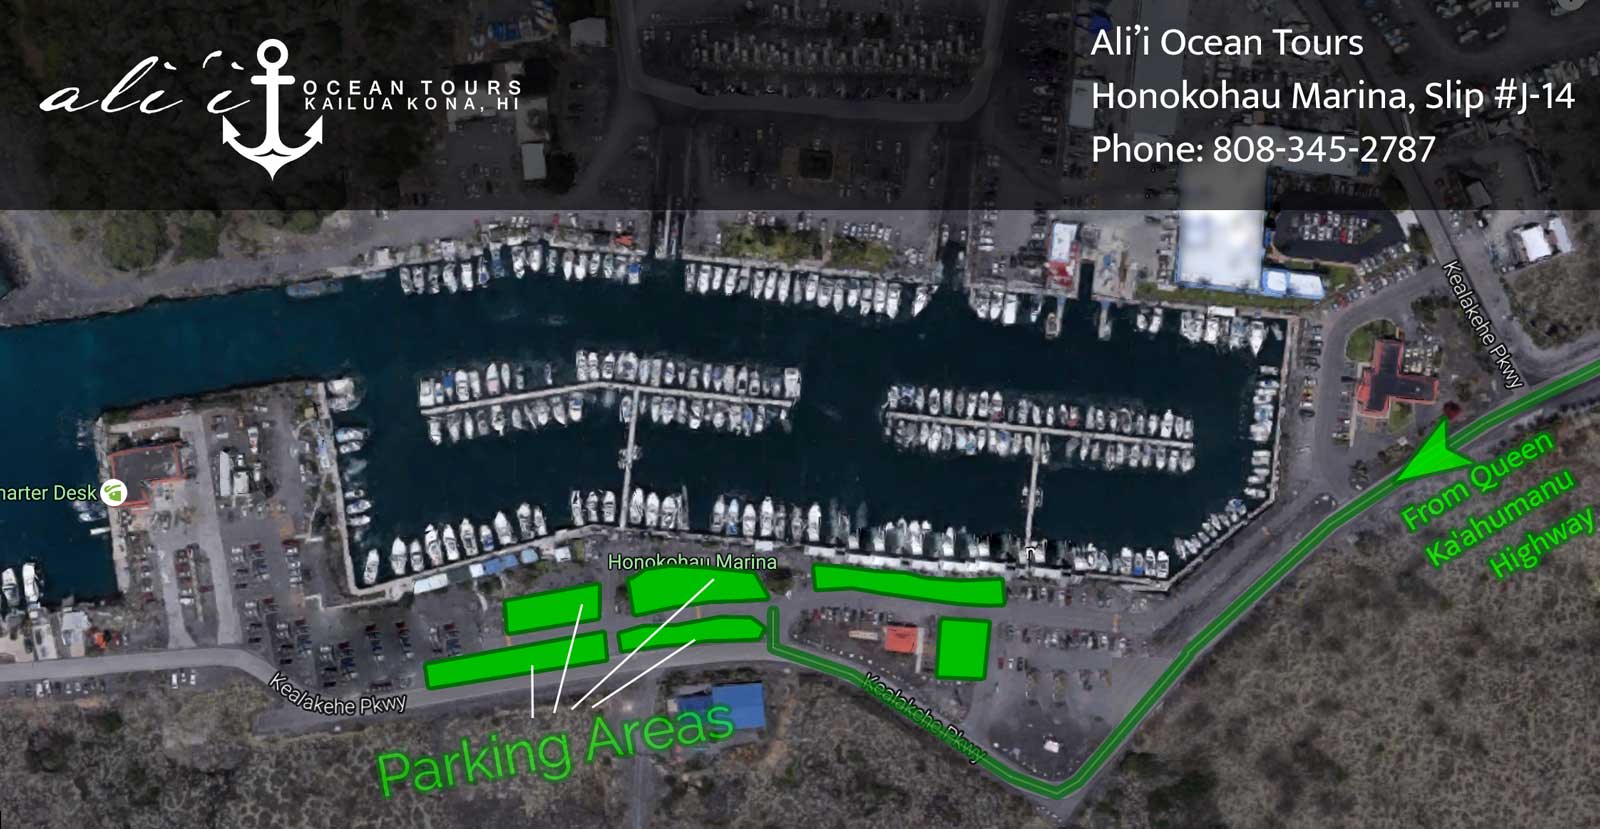 Parking Directions for Ali'i Ocean Tours